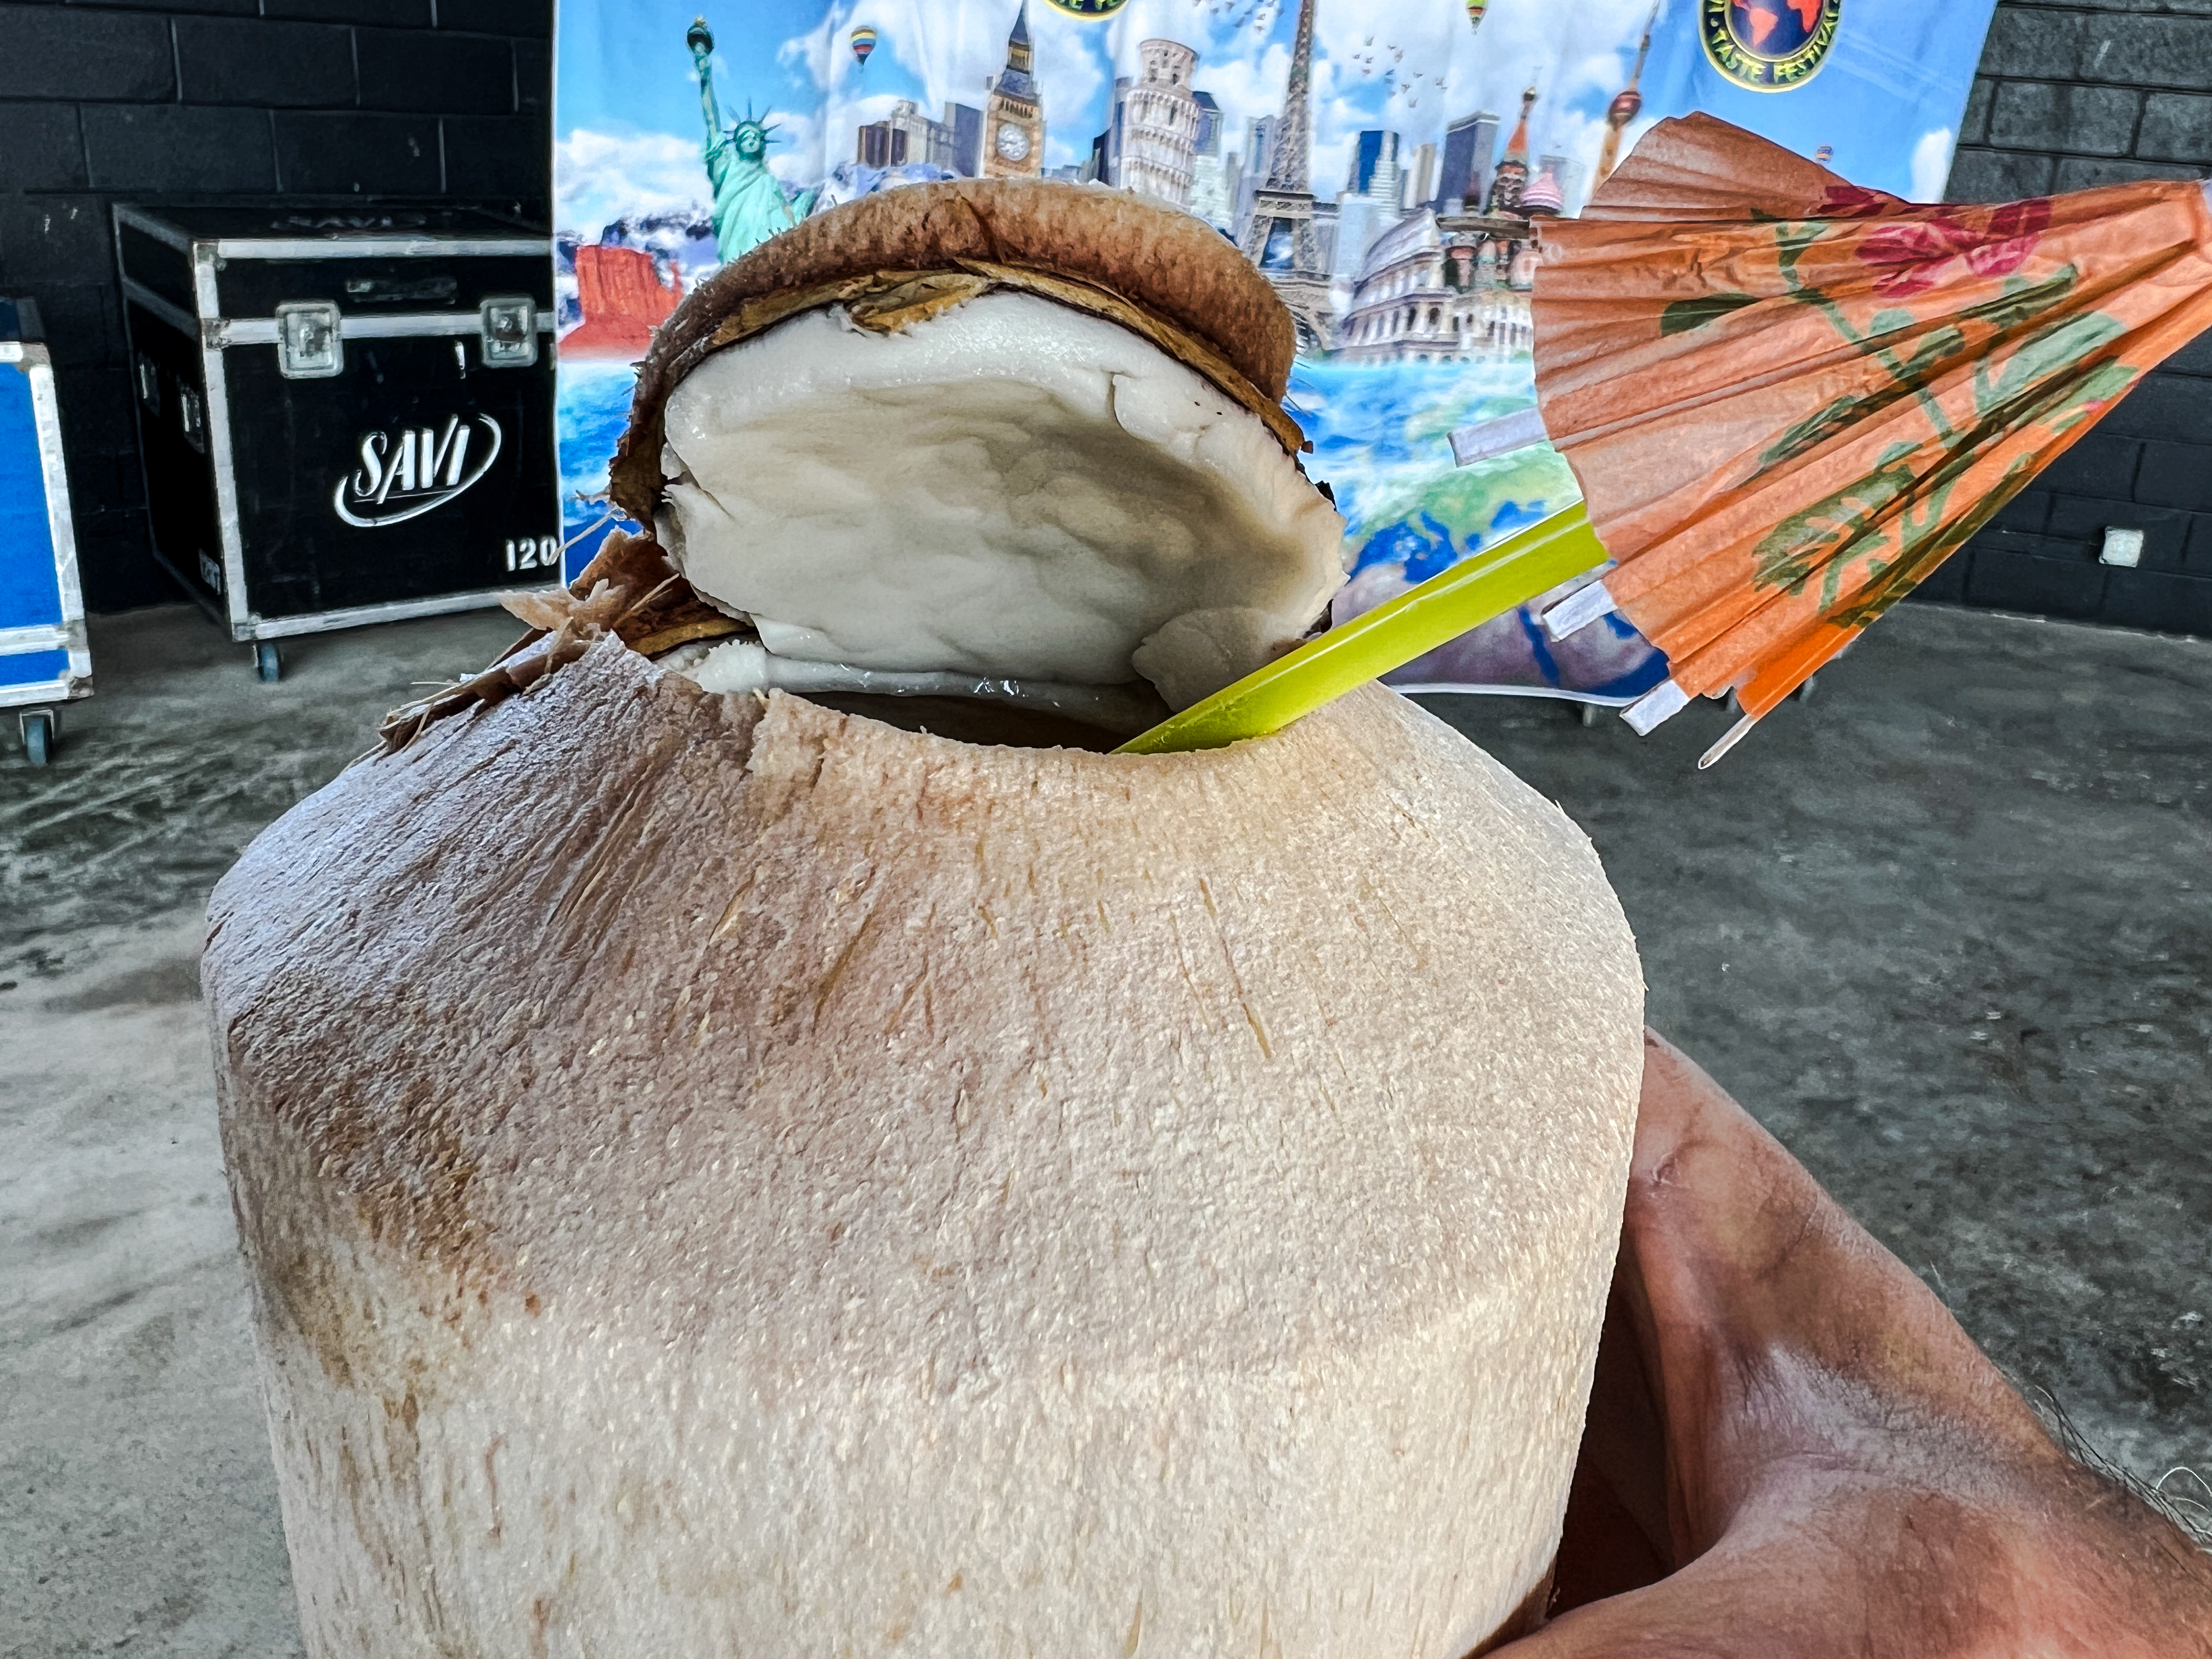 A freshly cracked coconut from MaPow at the New York State Fair. (Charlie Miller | cmiller@syracuse.com)